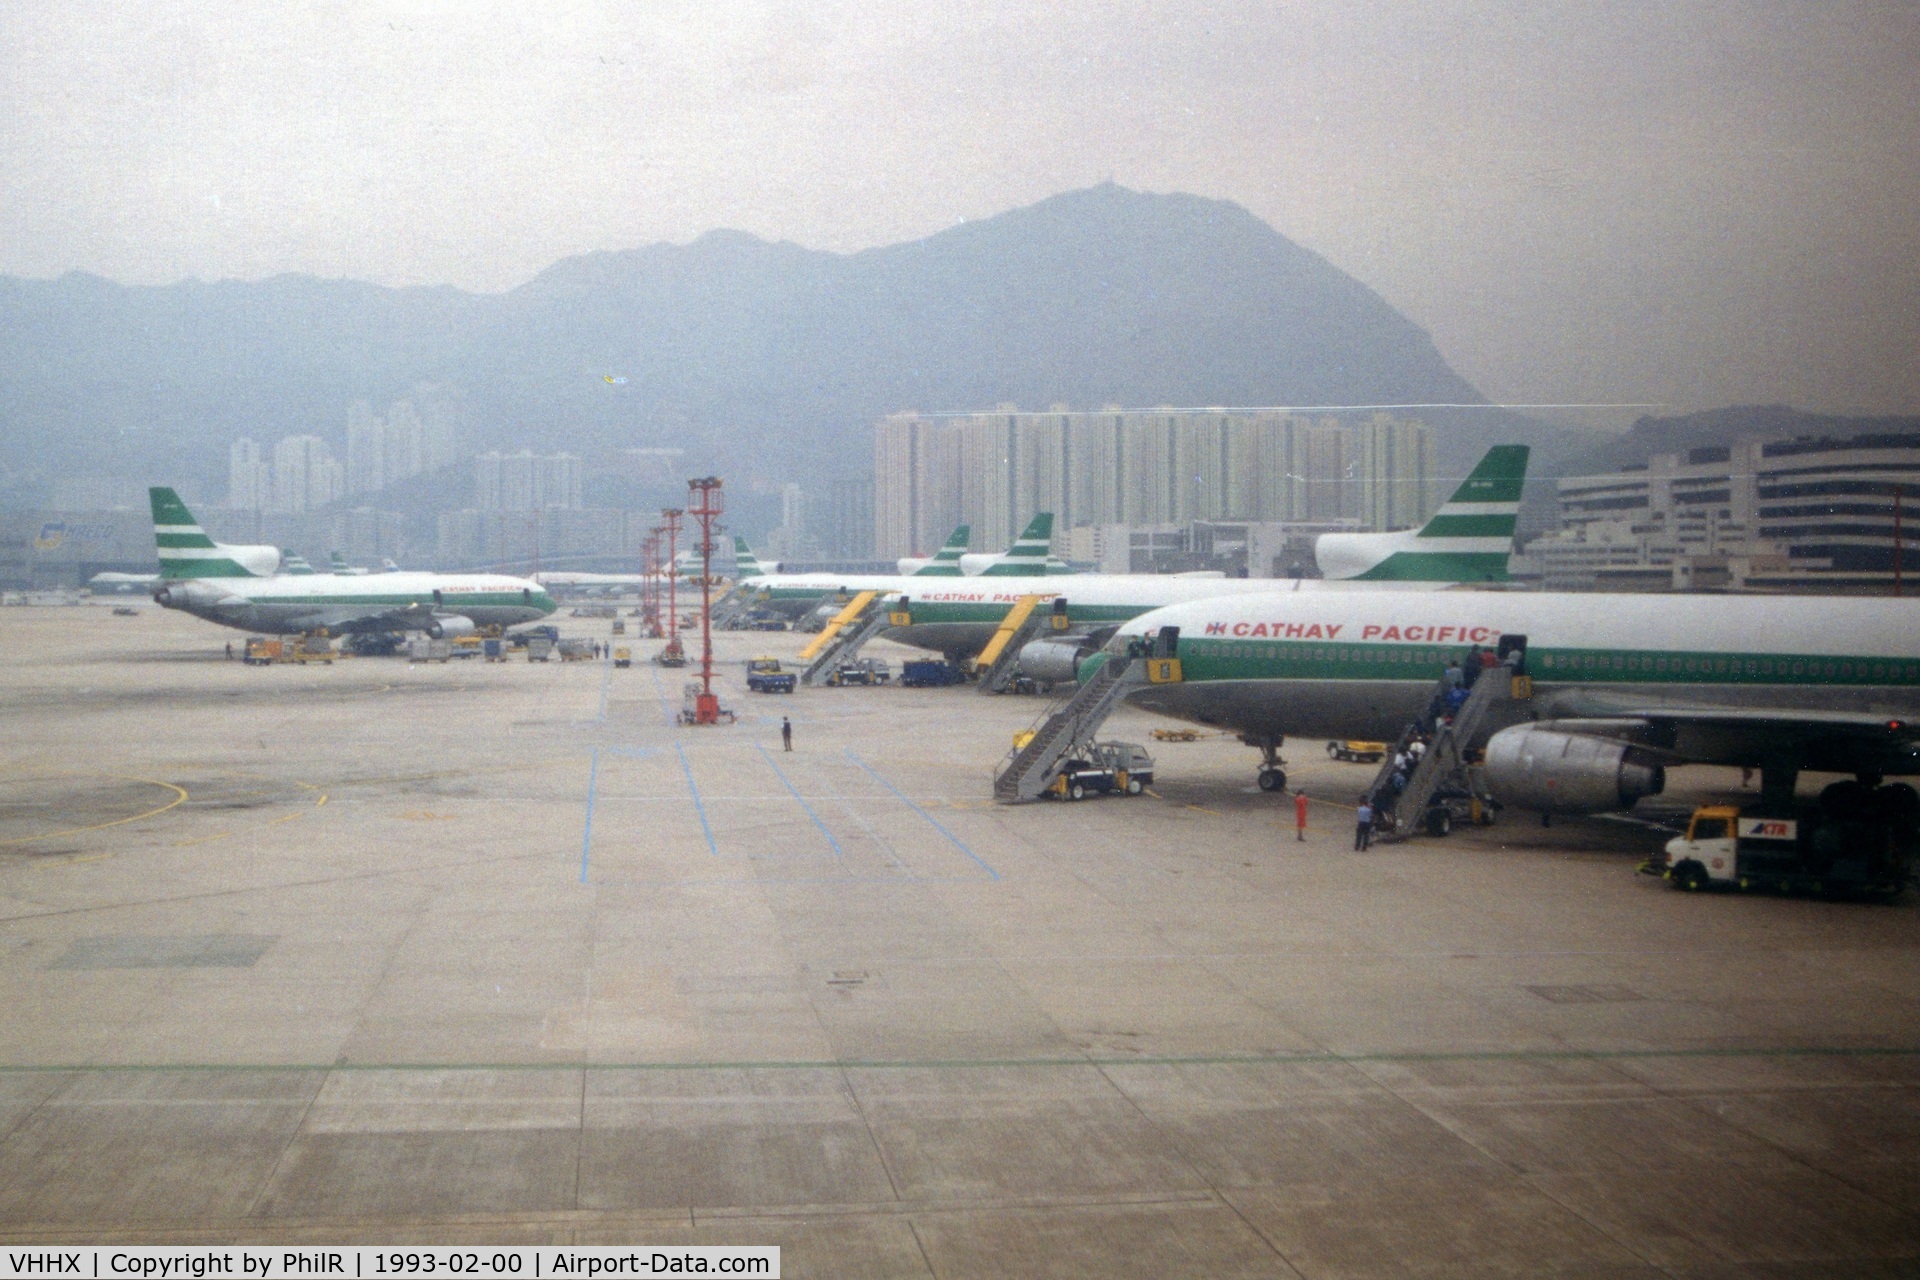 Kai Tak Airport (closed 1998), Kowloon Hong Kong (VHHX) - Scan of a poor photo of the Cathay ramp at Kai Tak HKG during a foggy morning landing in 1993.